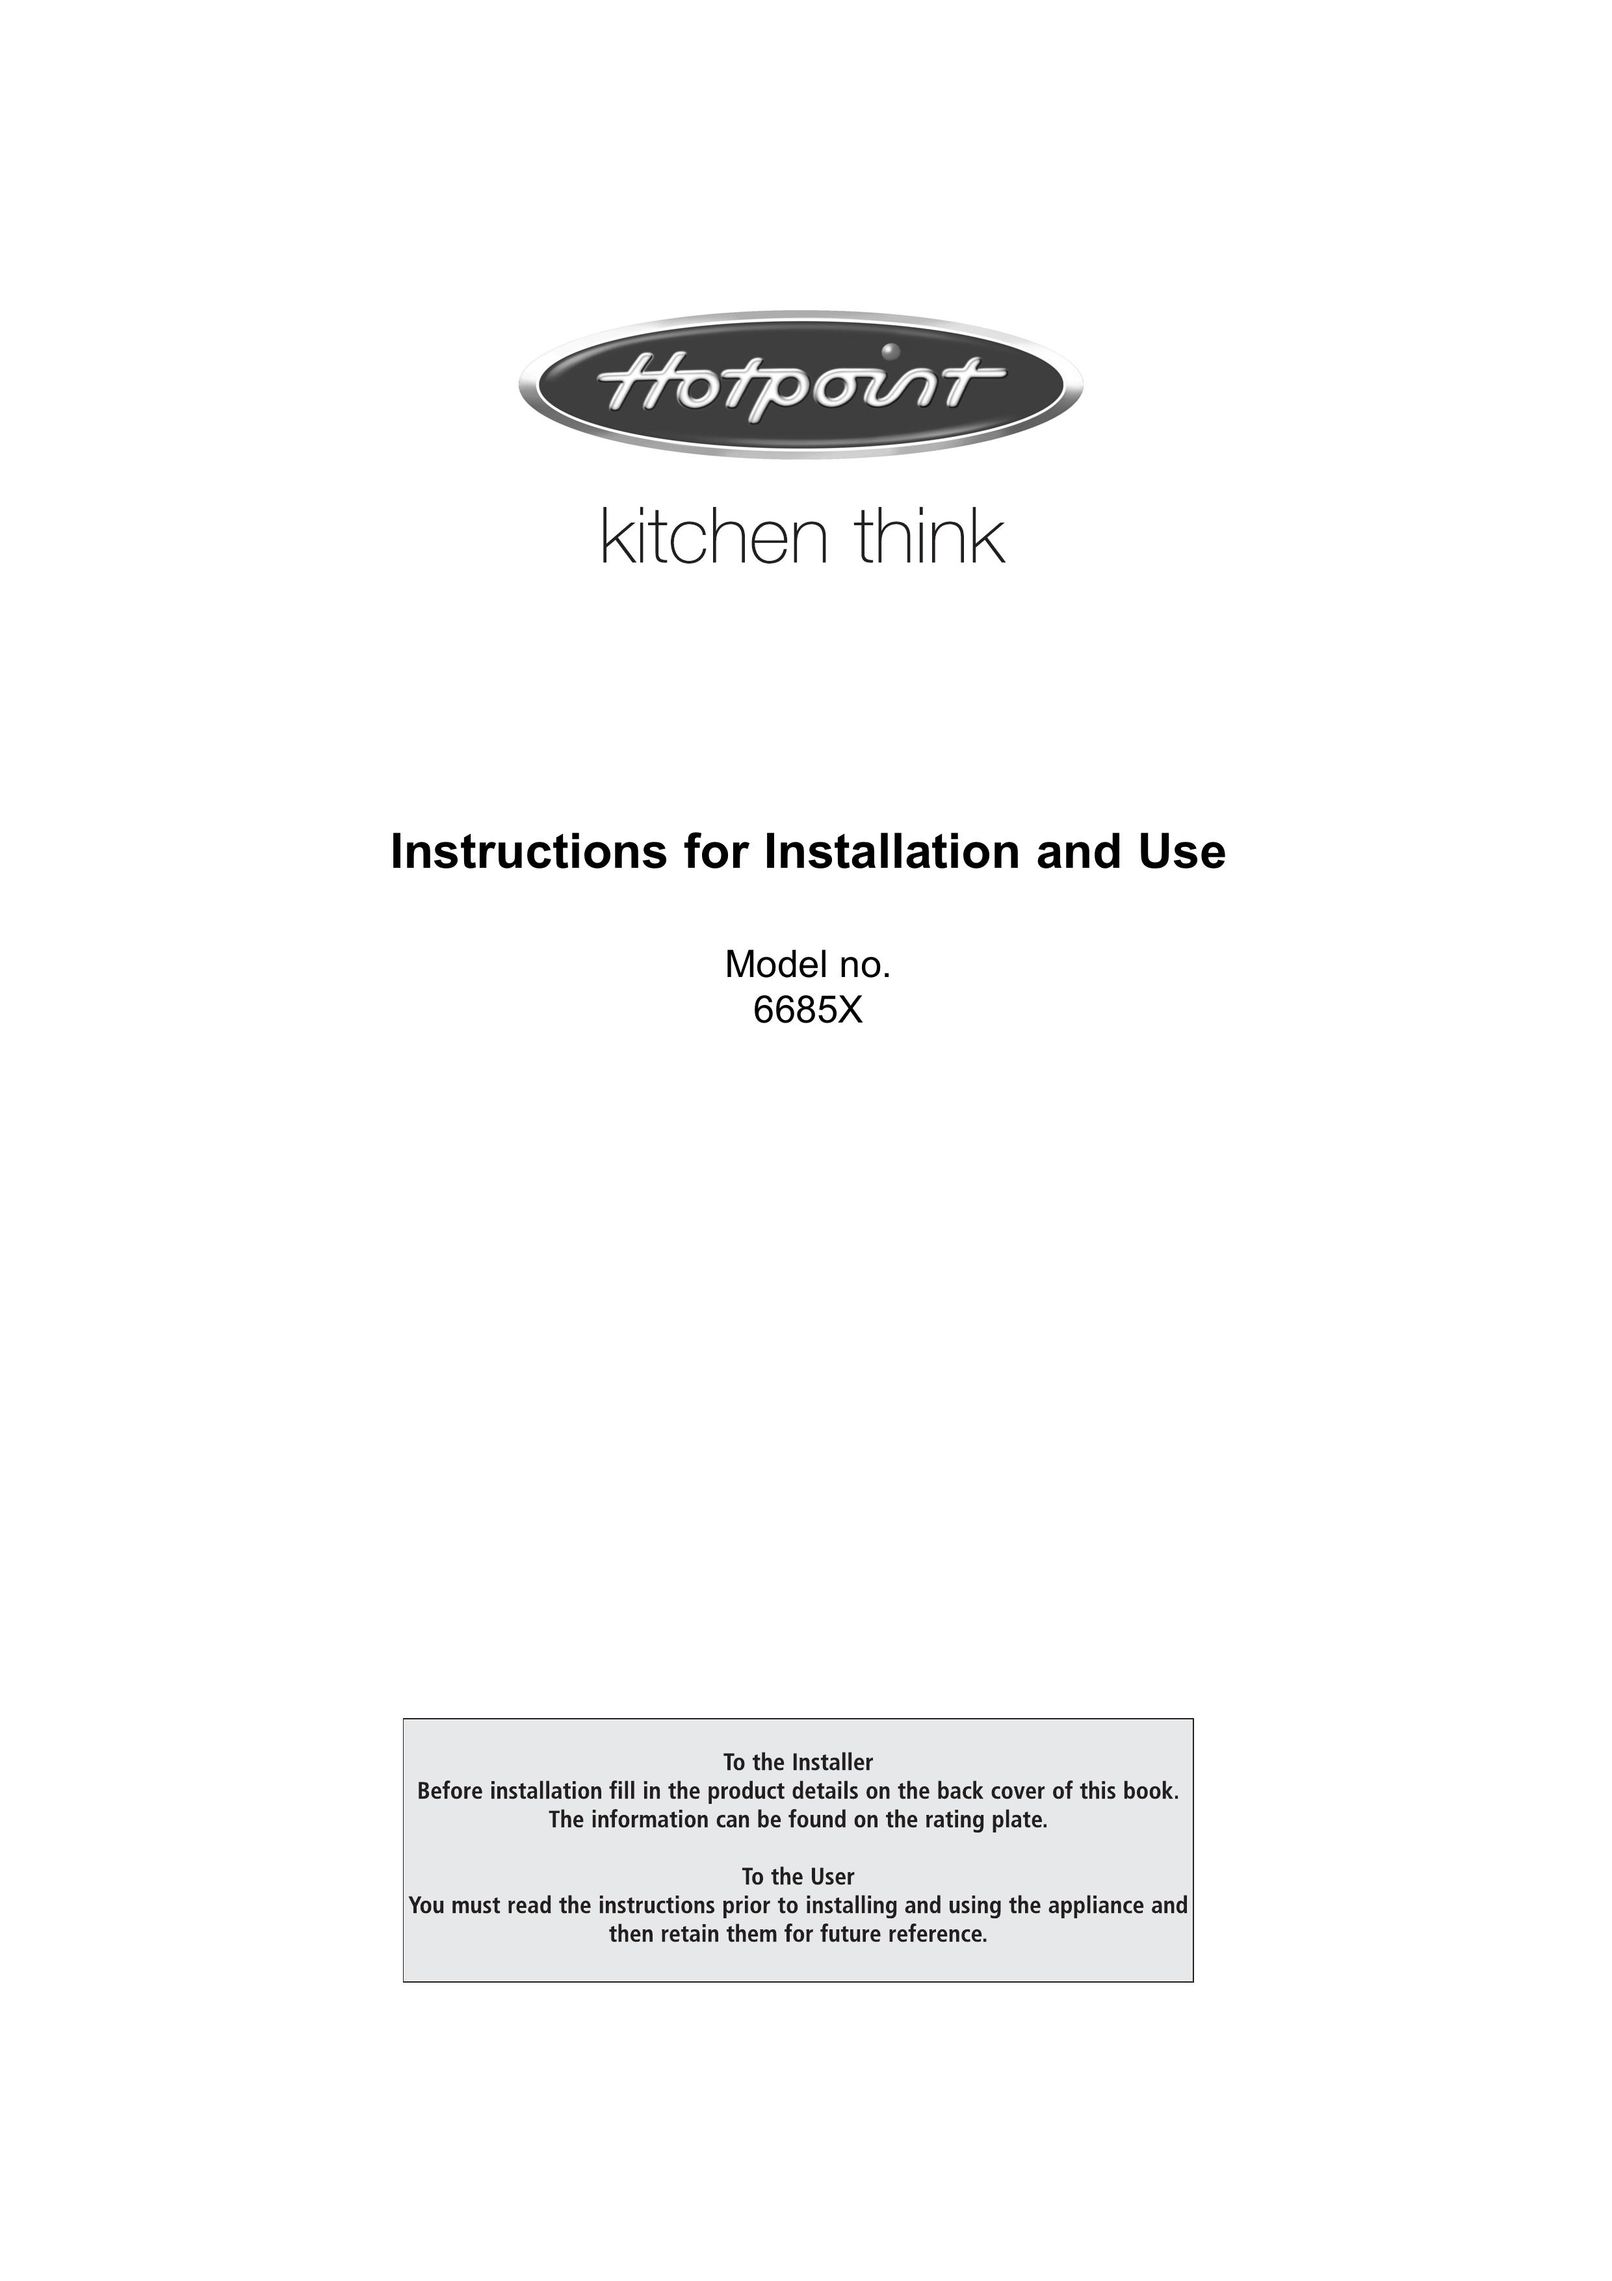 Hotpoint 6685X Microwave Oven User Manual